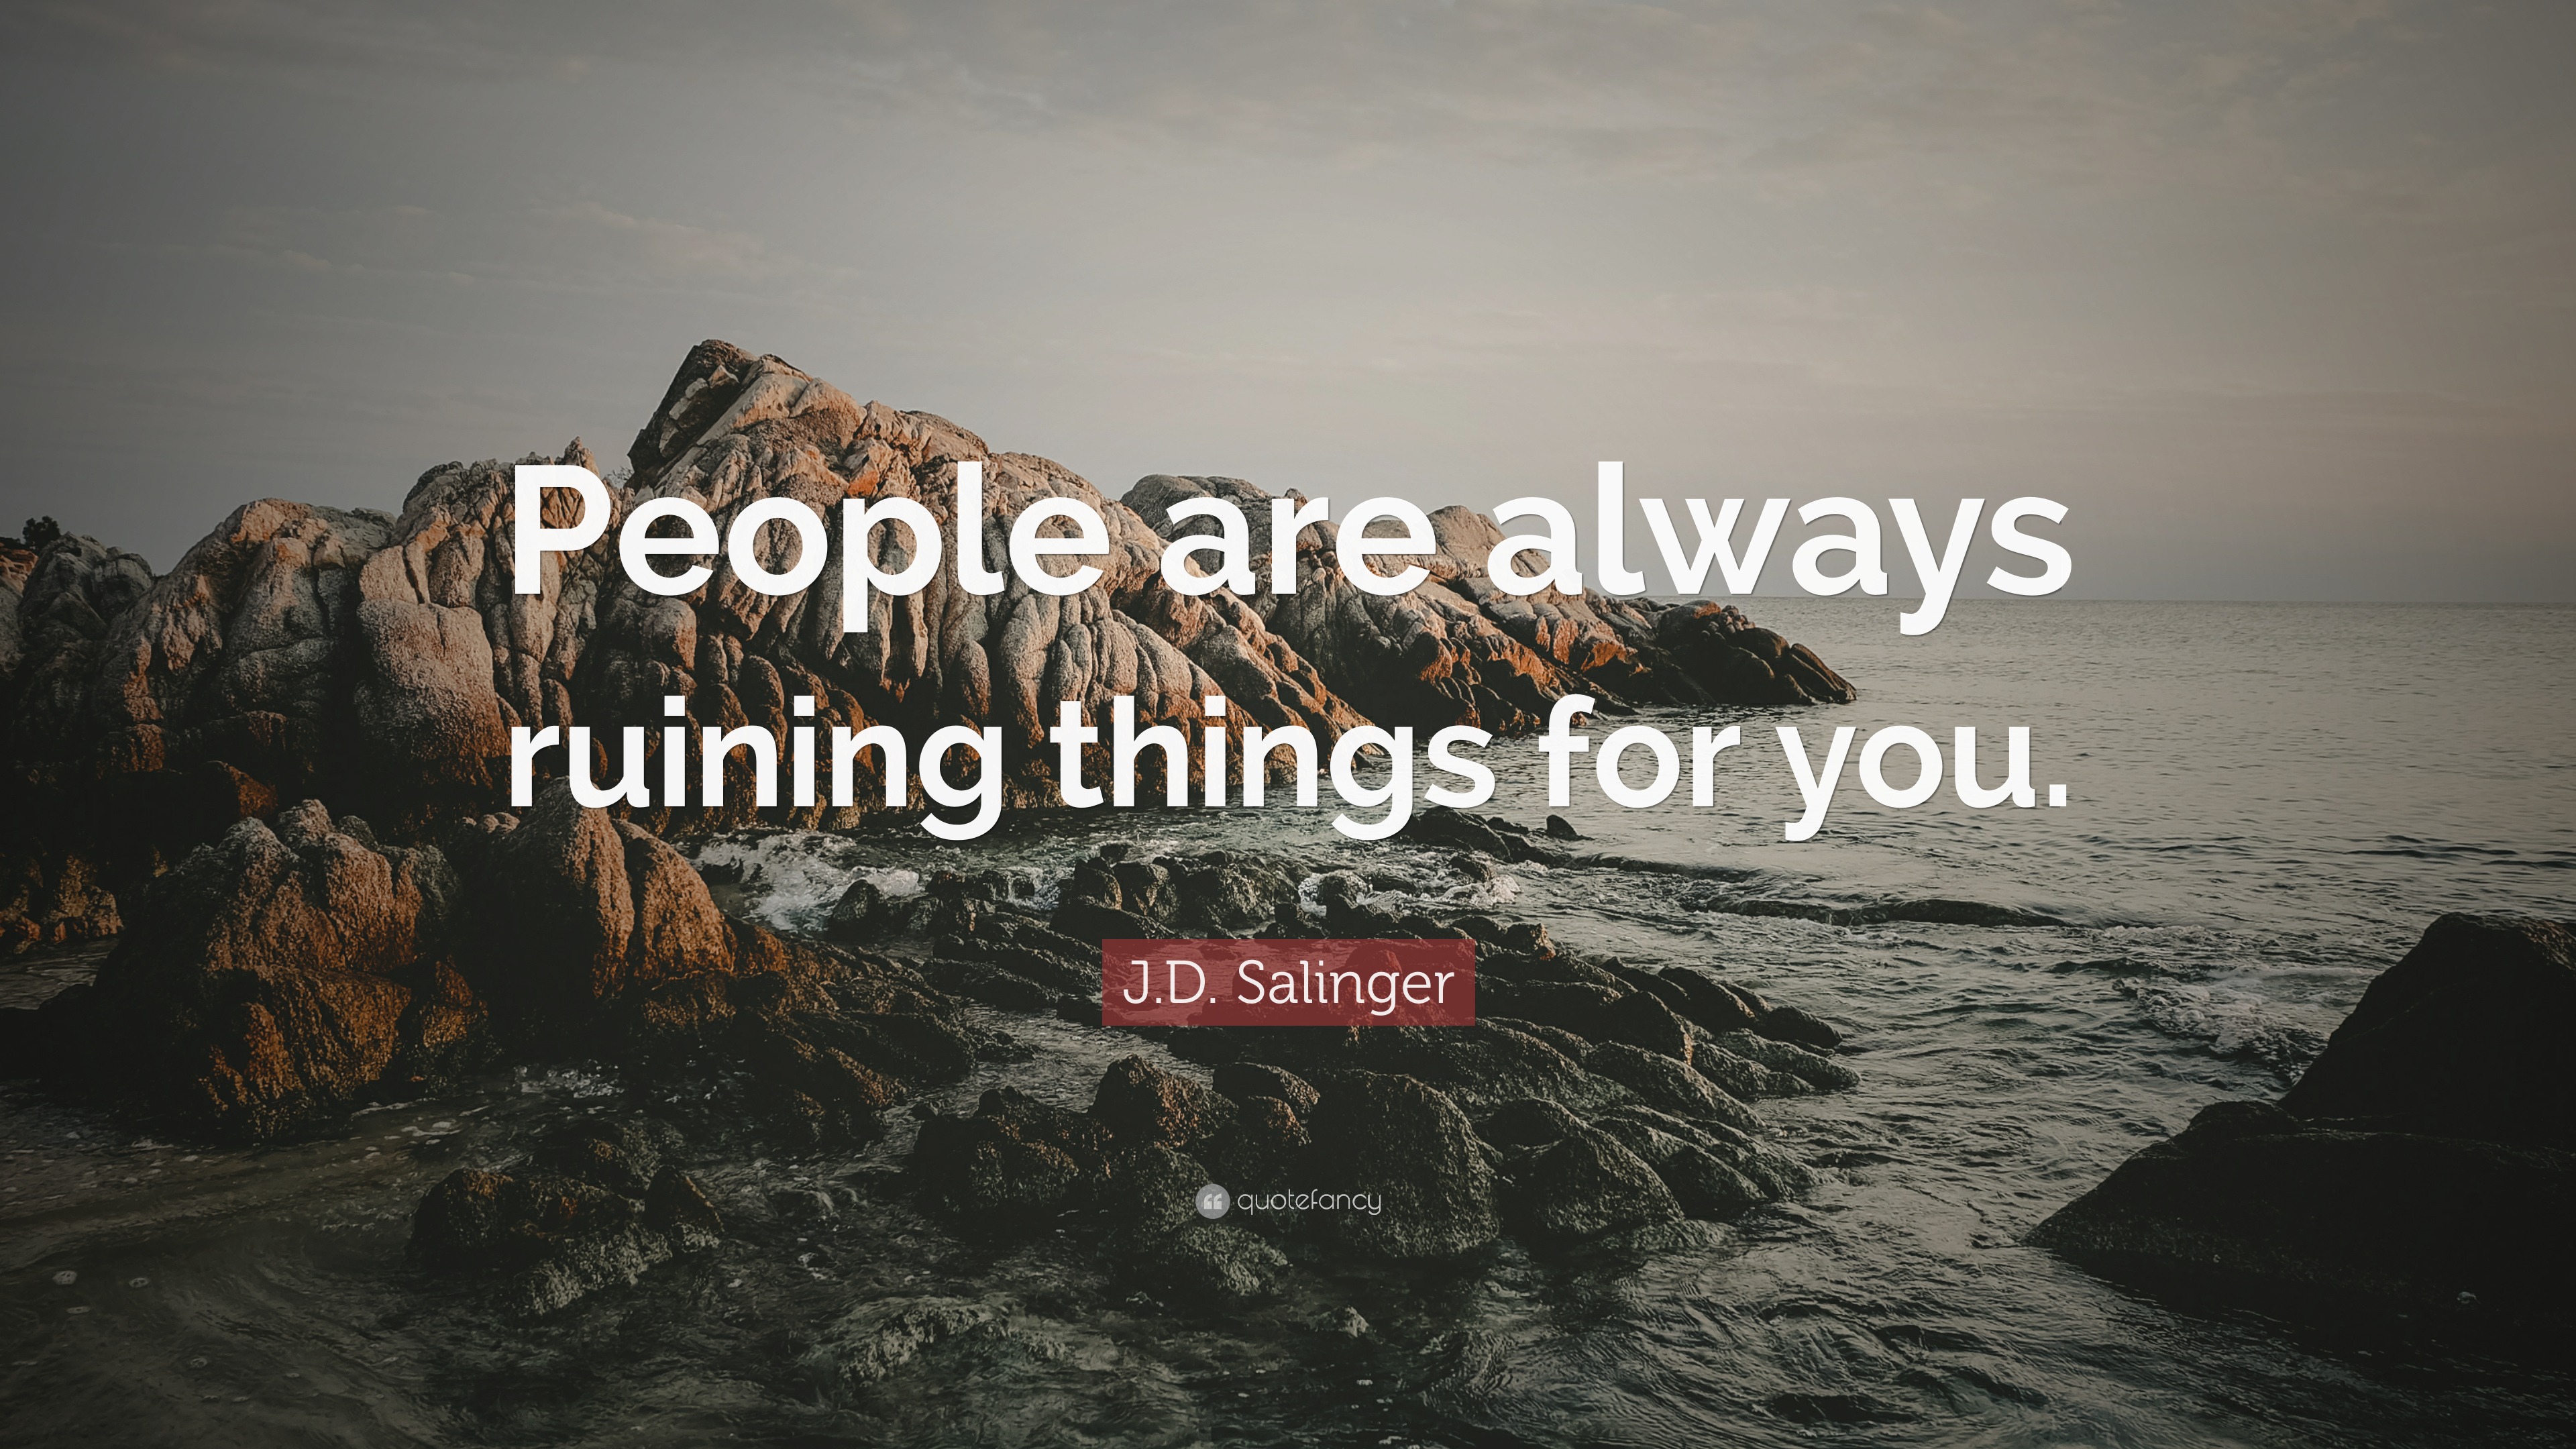 J.D. Salinger Quote: “People are always ruining things for you.”